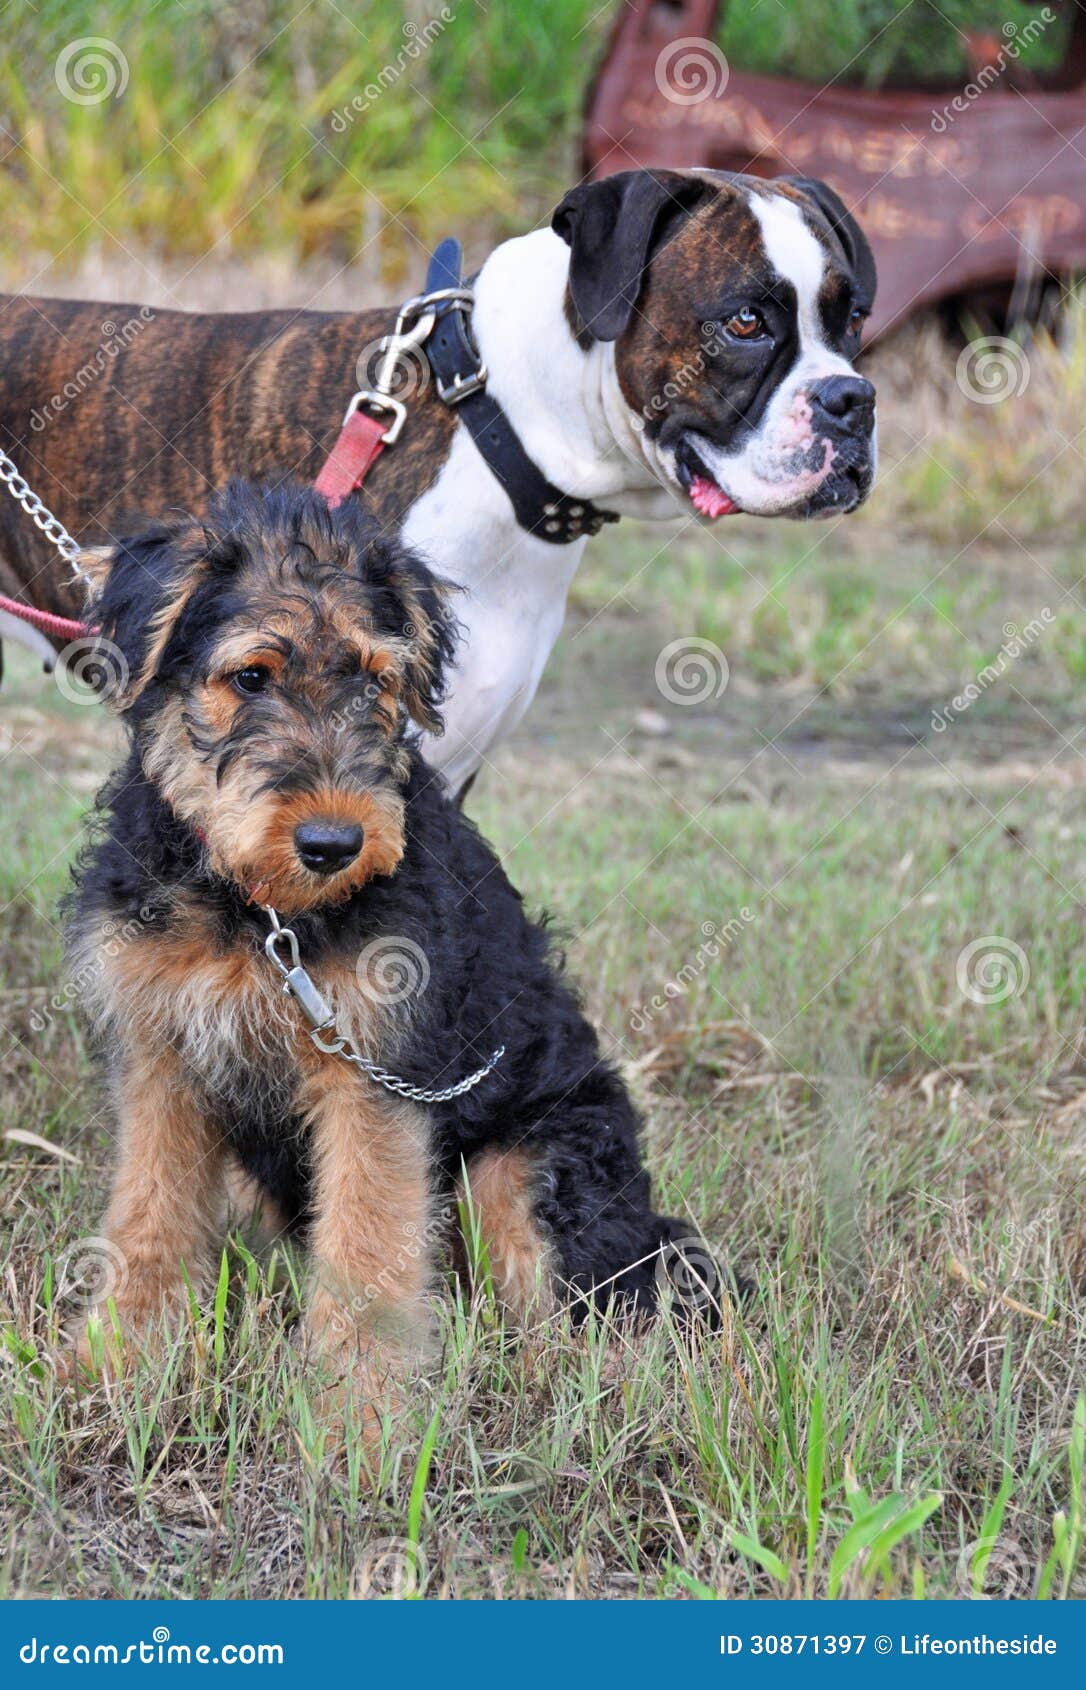 can a airedale terrier and a great dane be friends